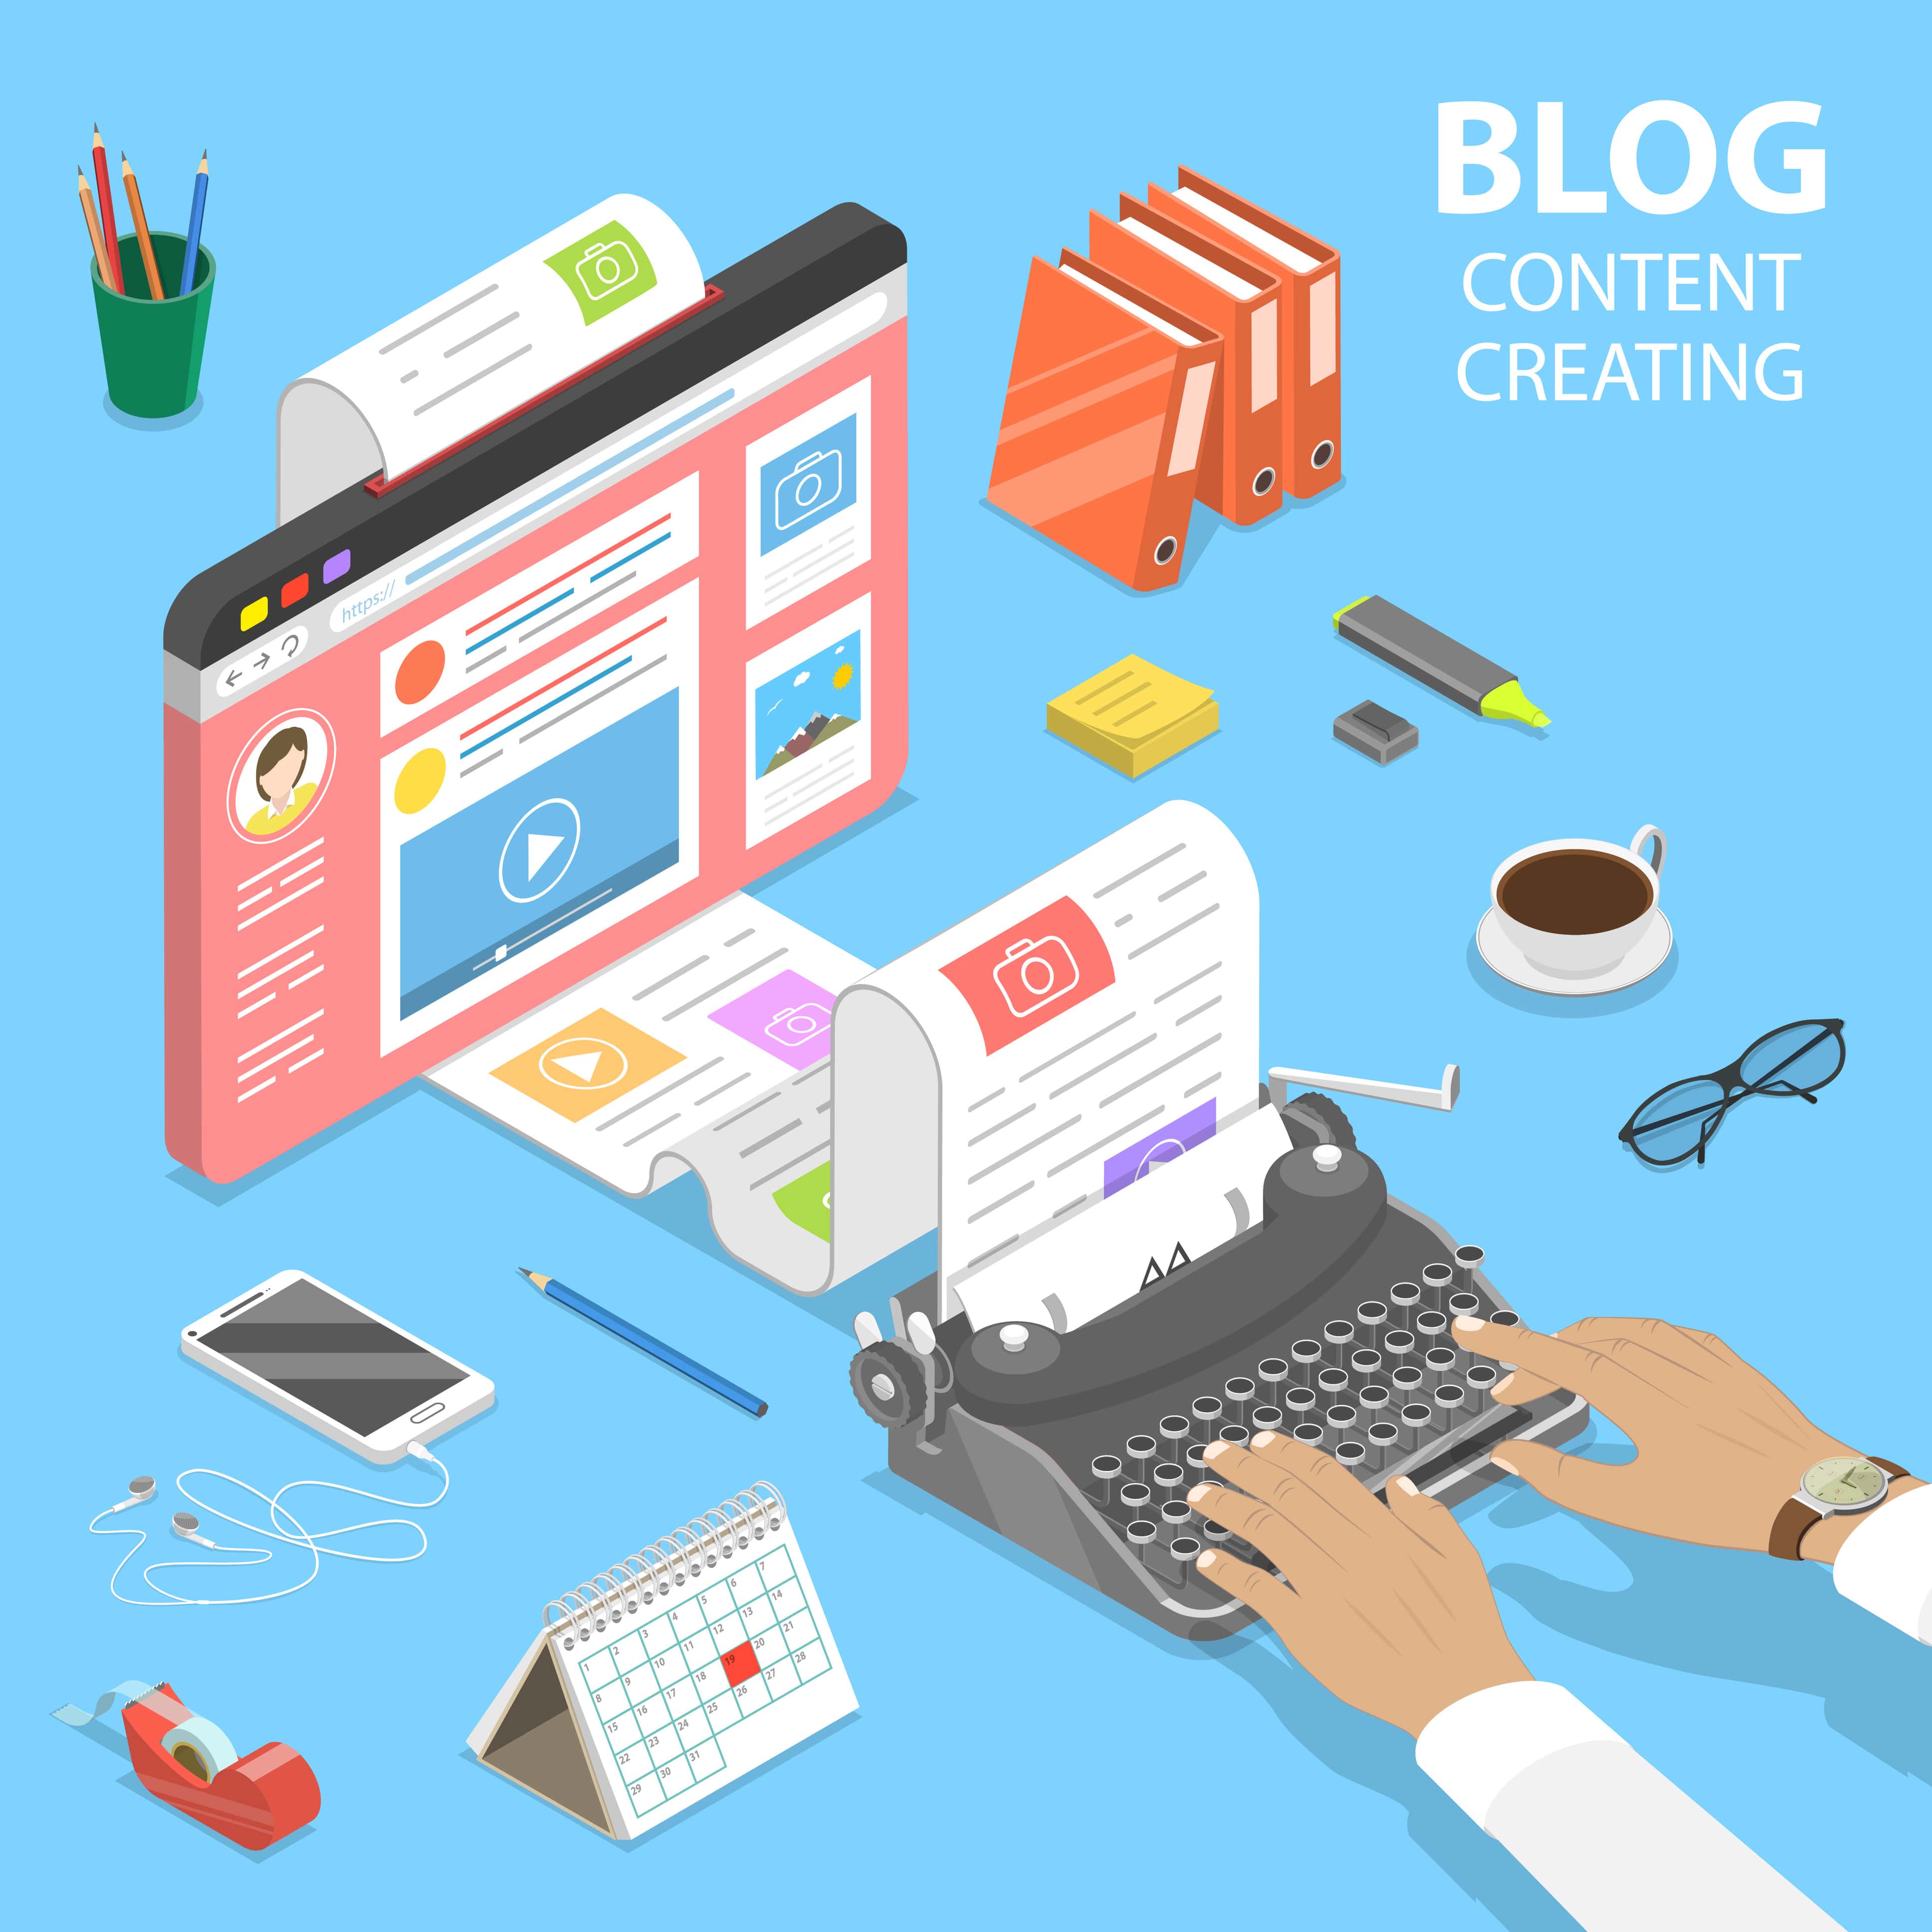 What are the best practices for blog posting and content creation